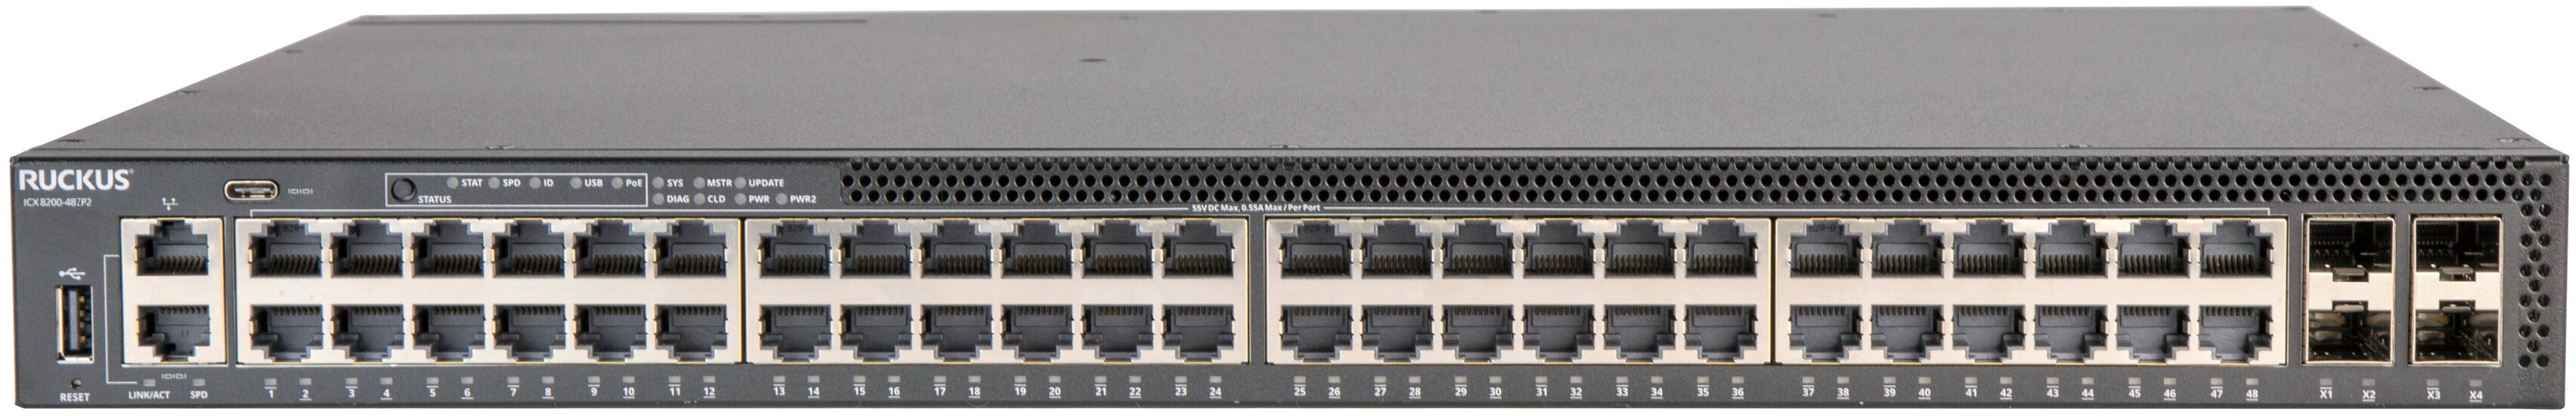 RUCKUS_ICX_8200_Switch_32x1G_PoE_ports_16x2_5G_PoE-preview